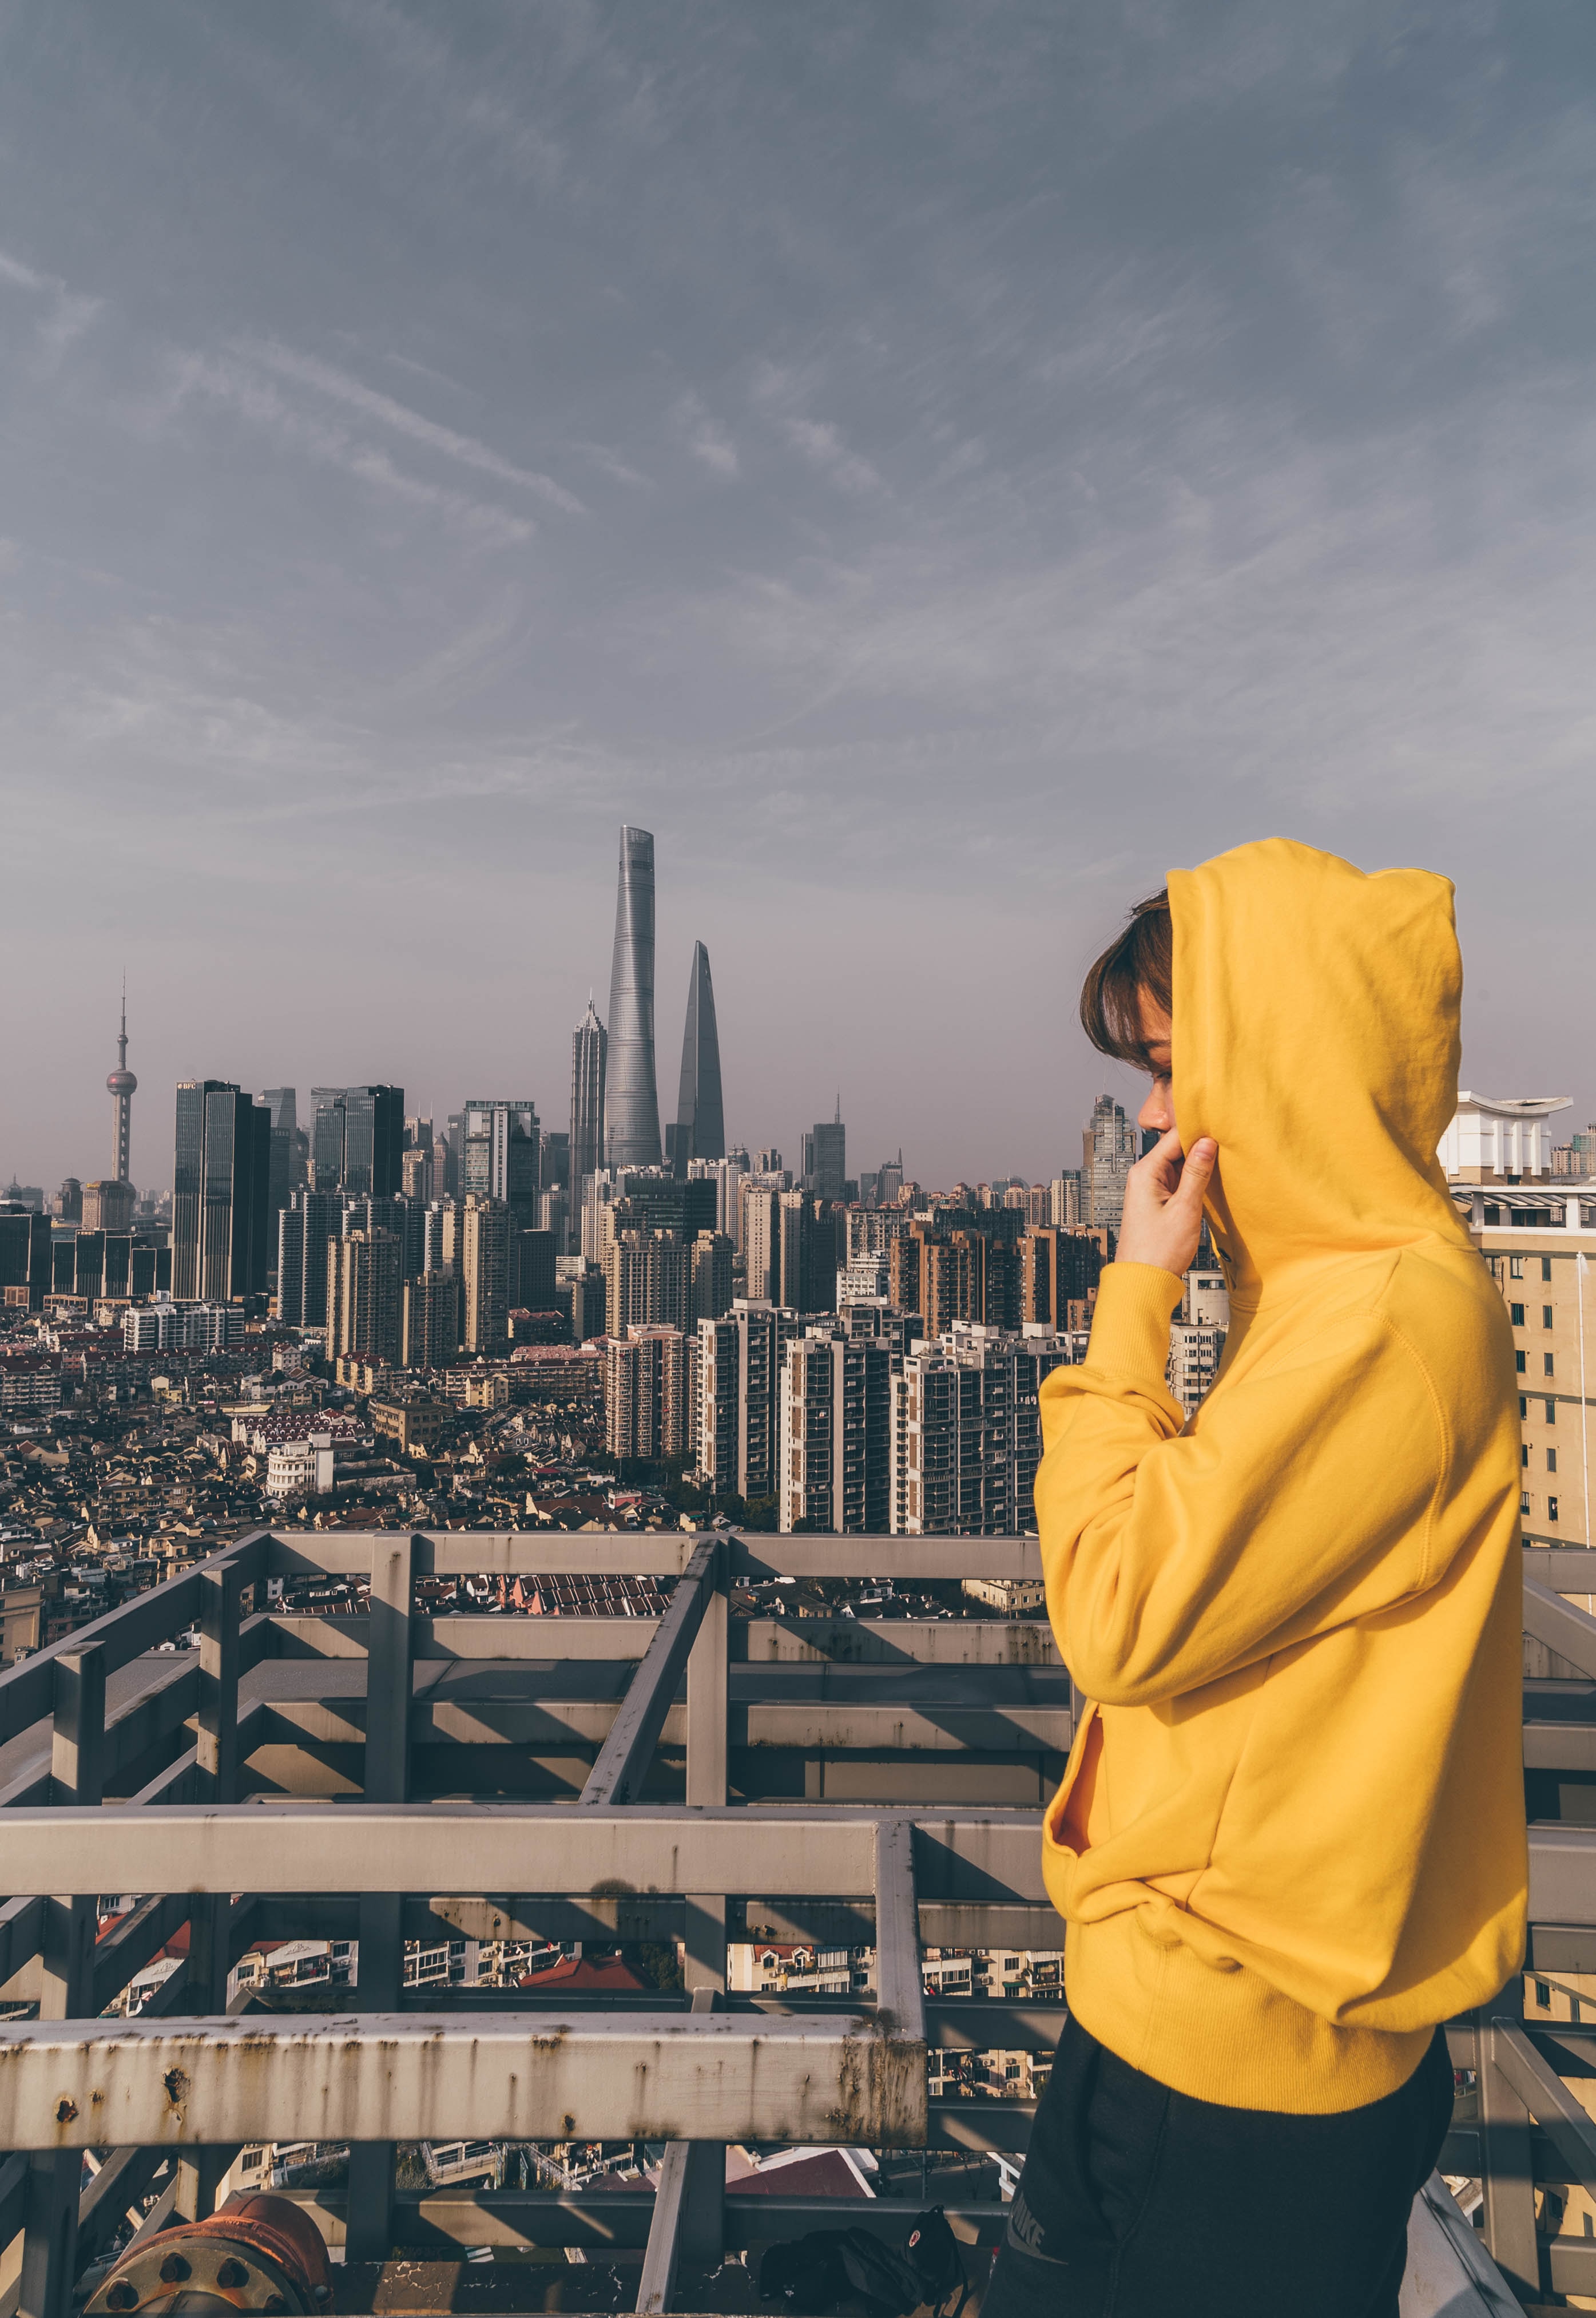 hoodies, yellow, city, building, miscellanea, miscellaneous, human, person, hoodie